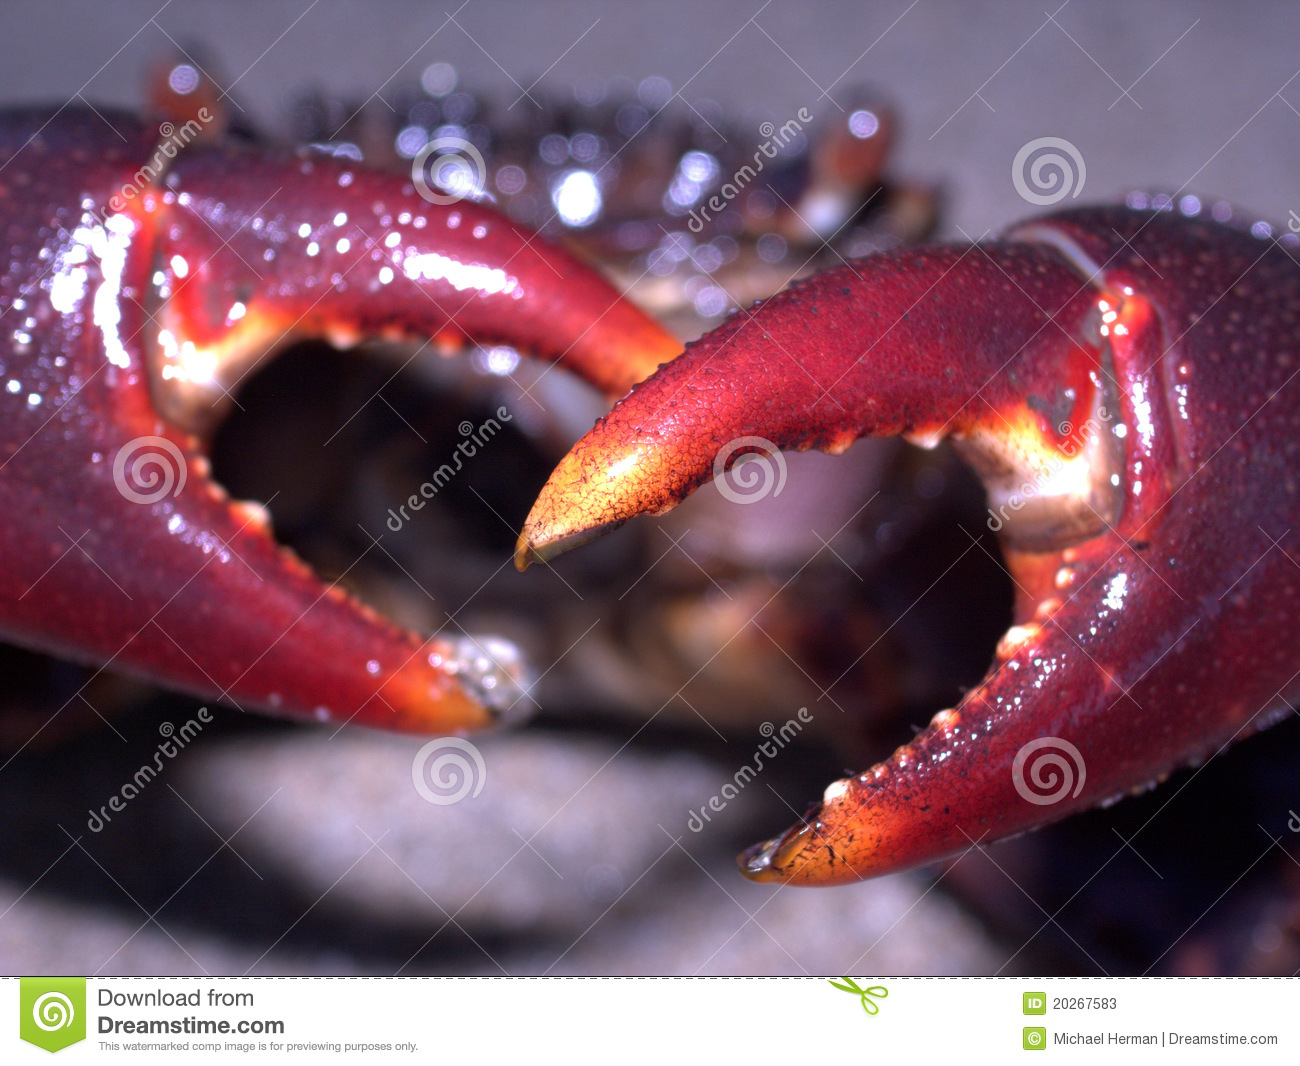 Crab With Pinchers Stock Photos   Image  20267583